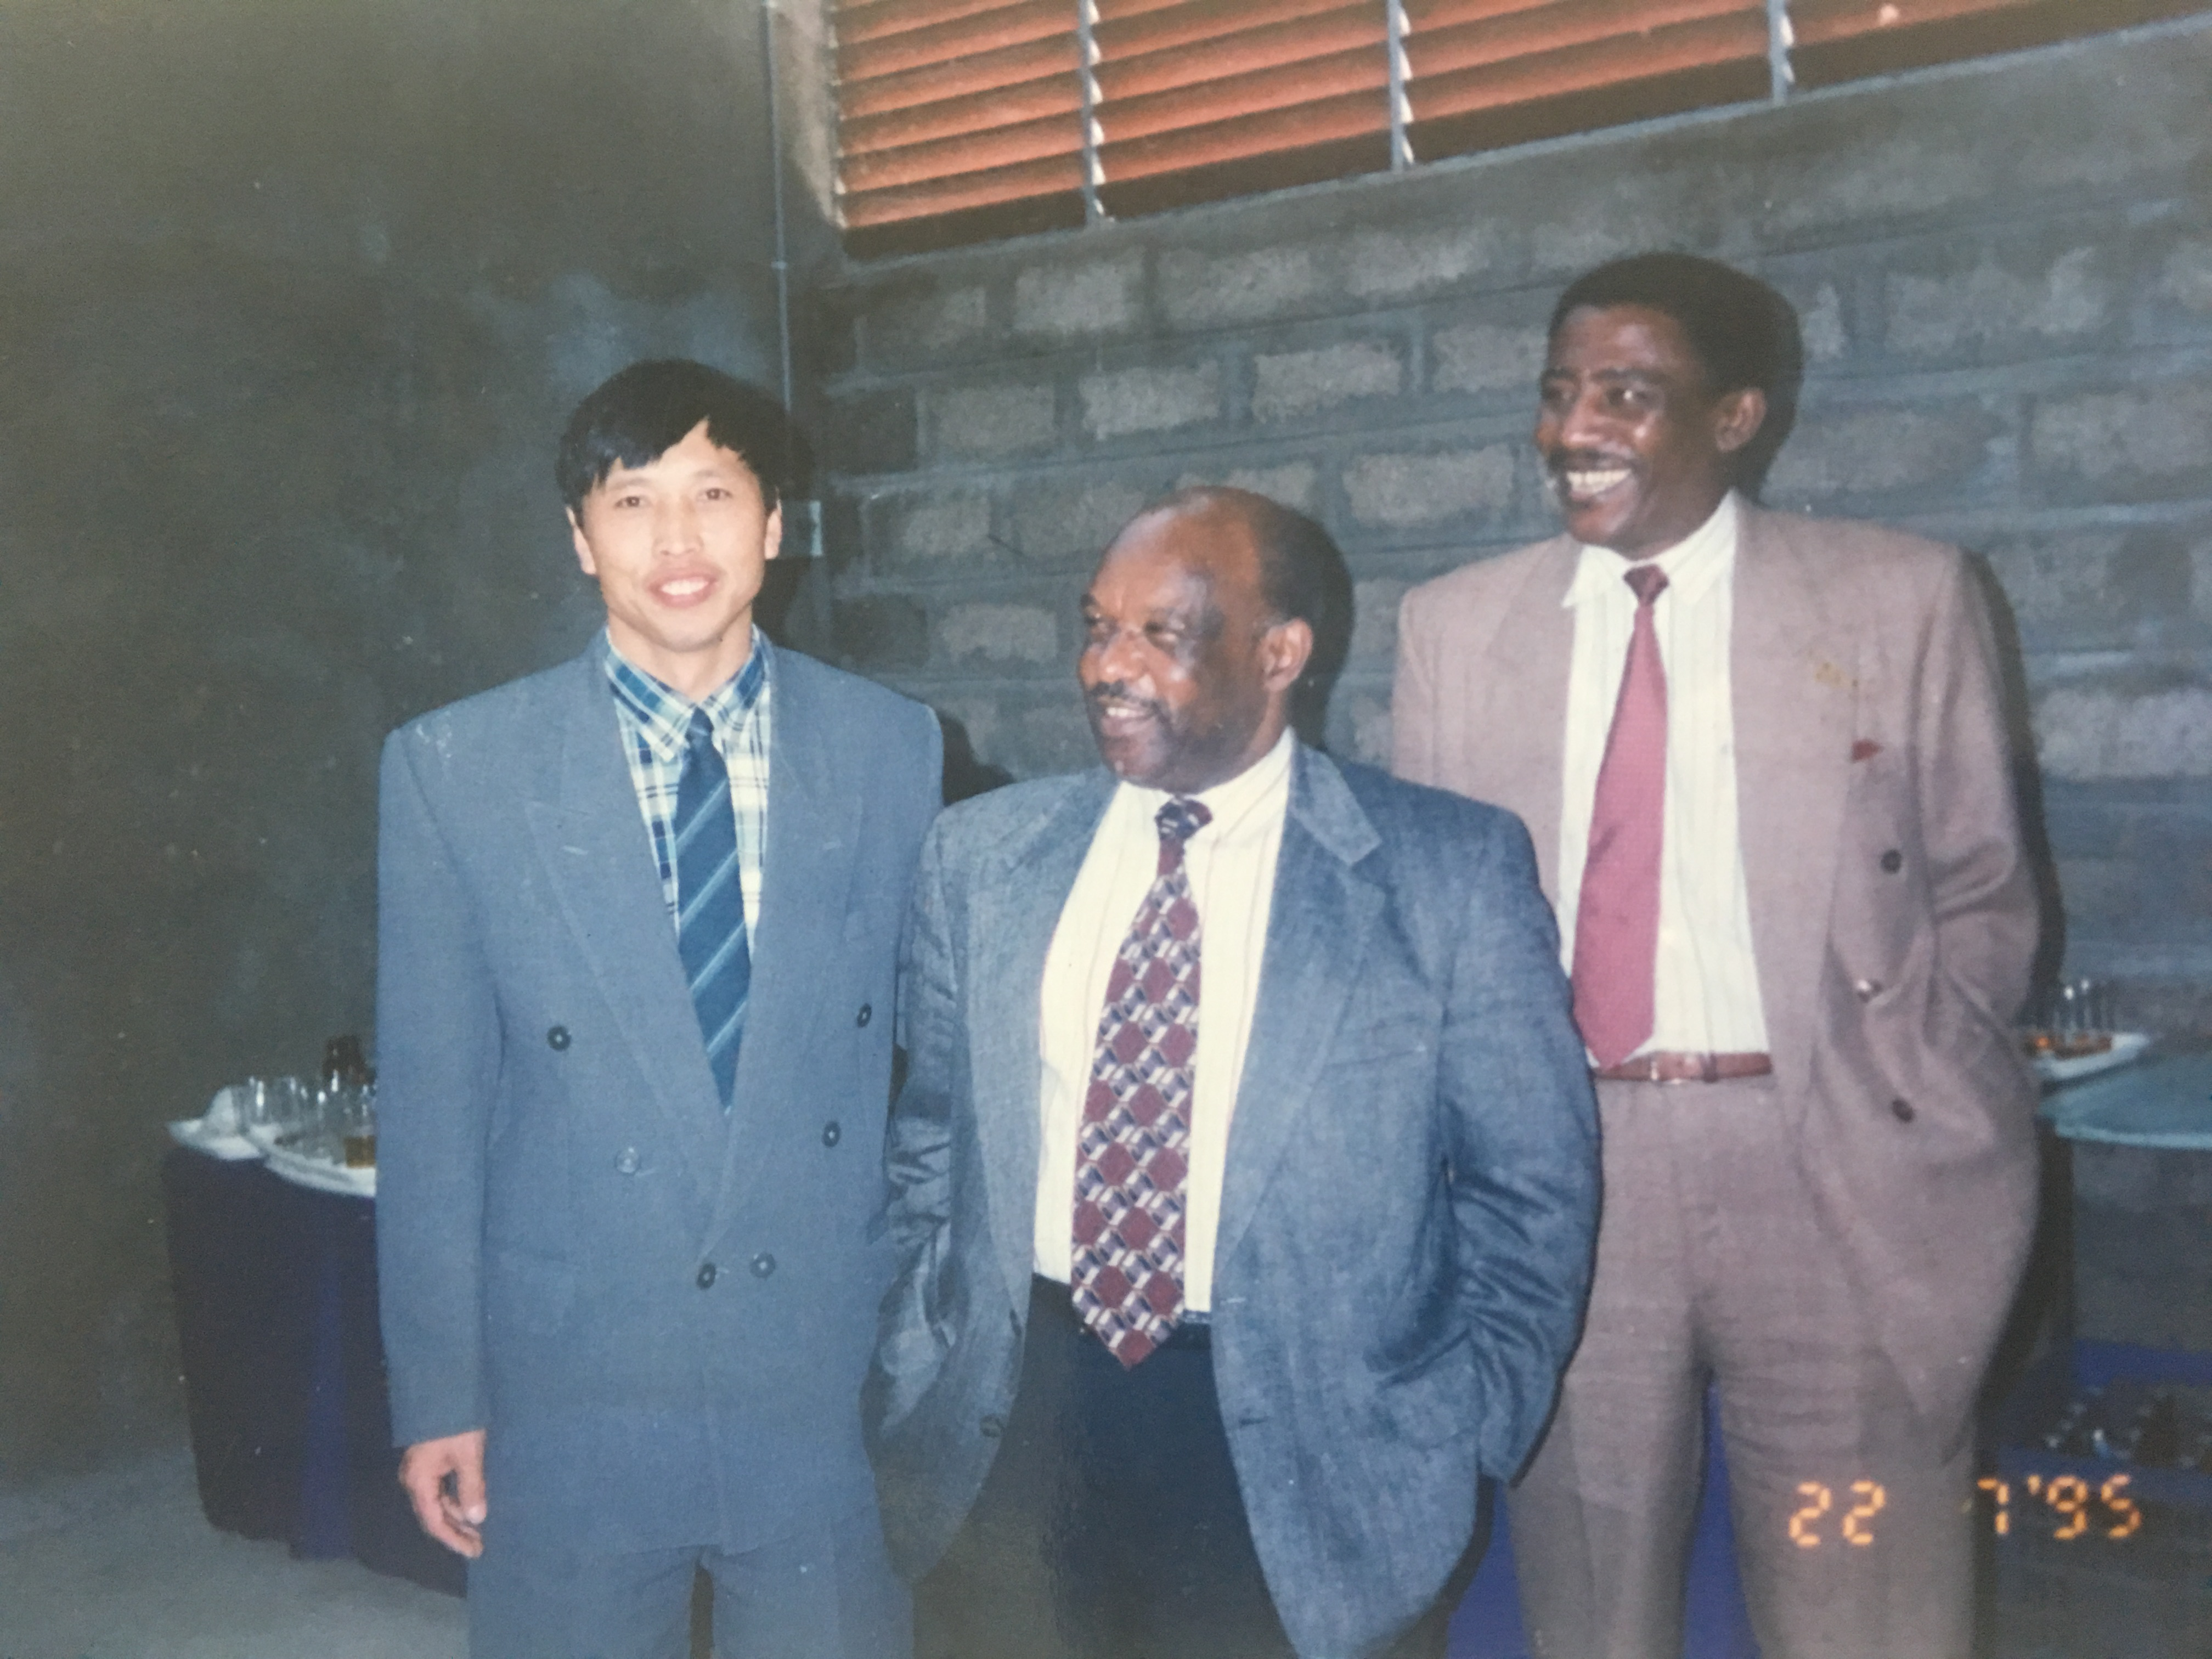 Mr.Guo Took photos with customers of Ethiopia (The left one is Mr.Guo)